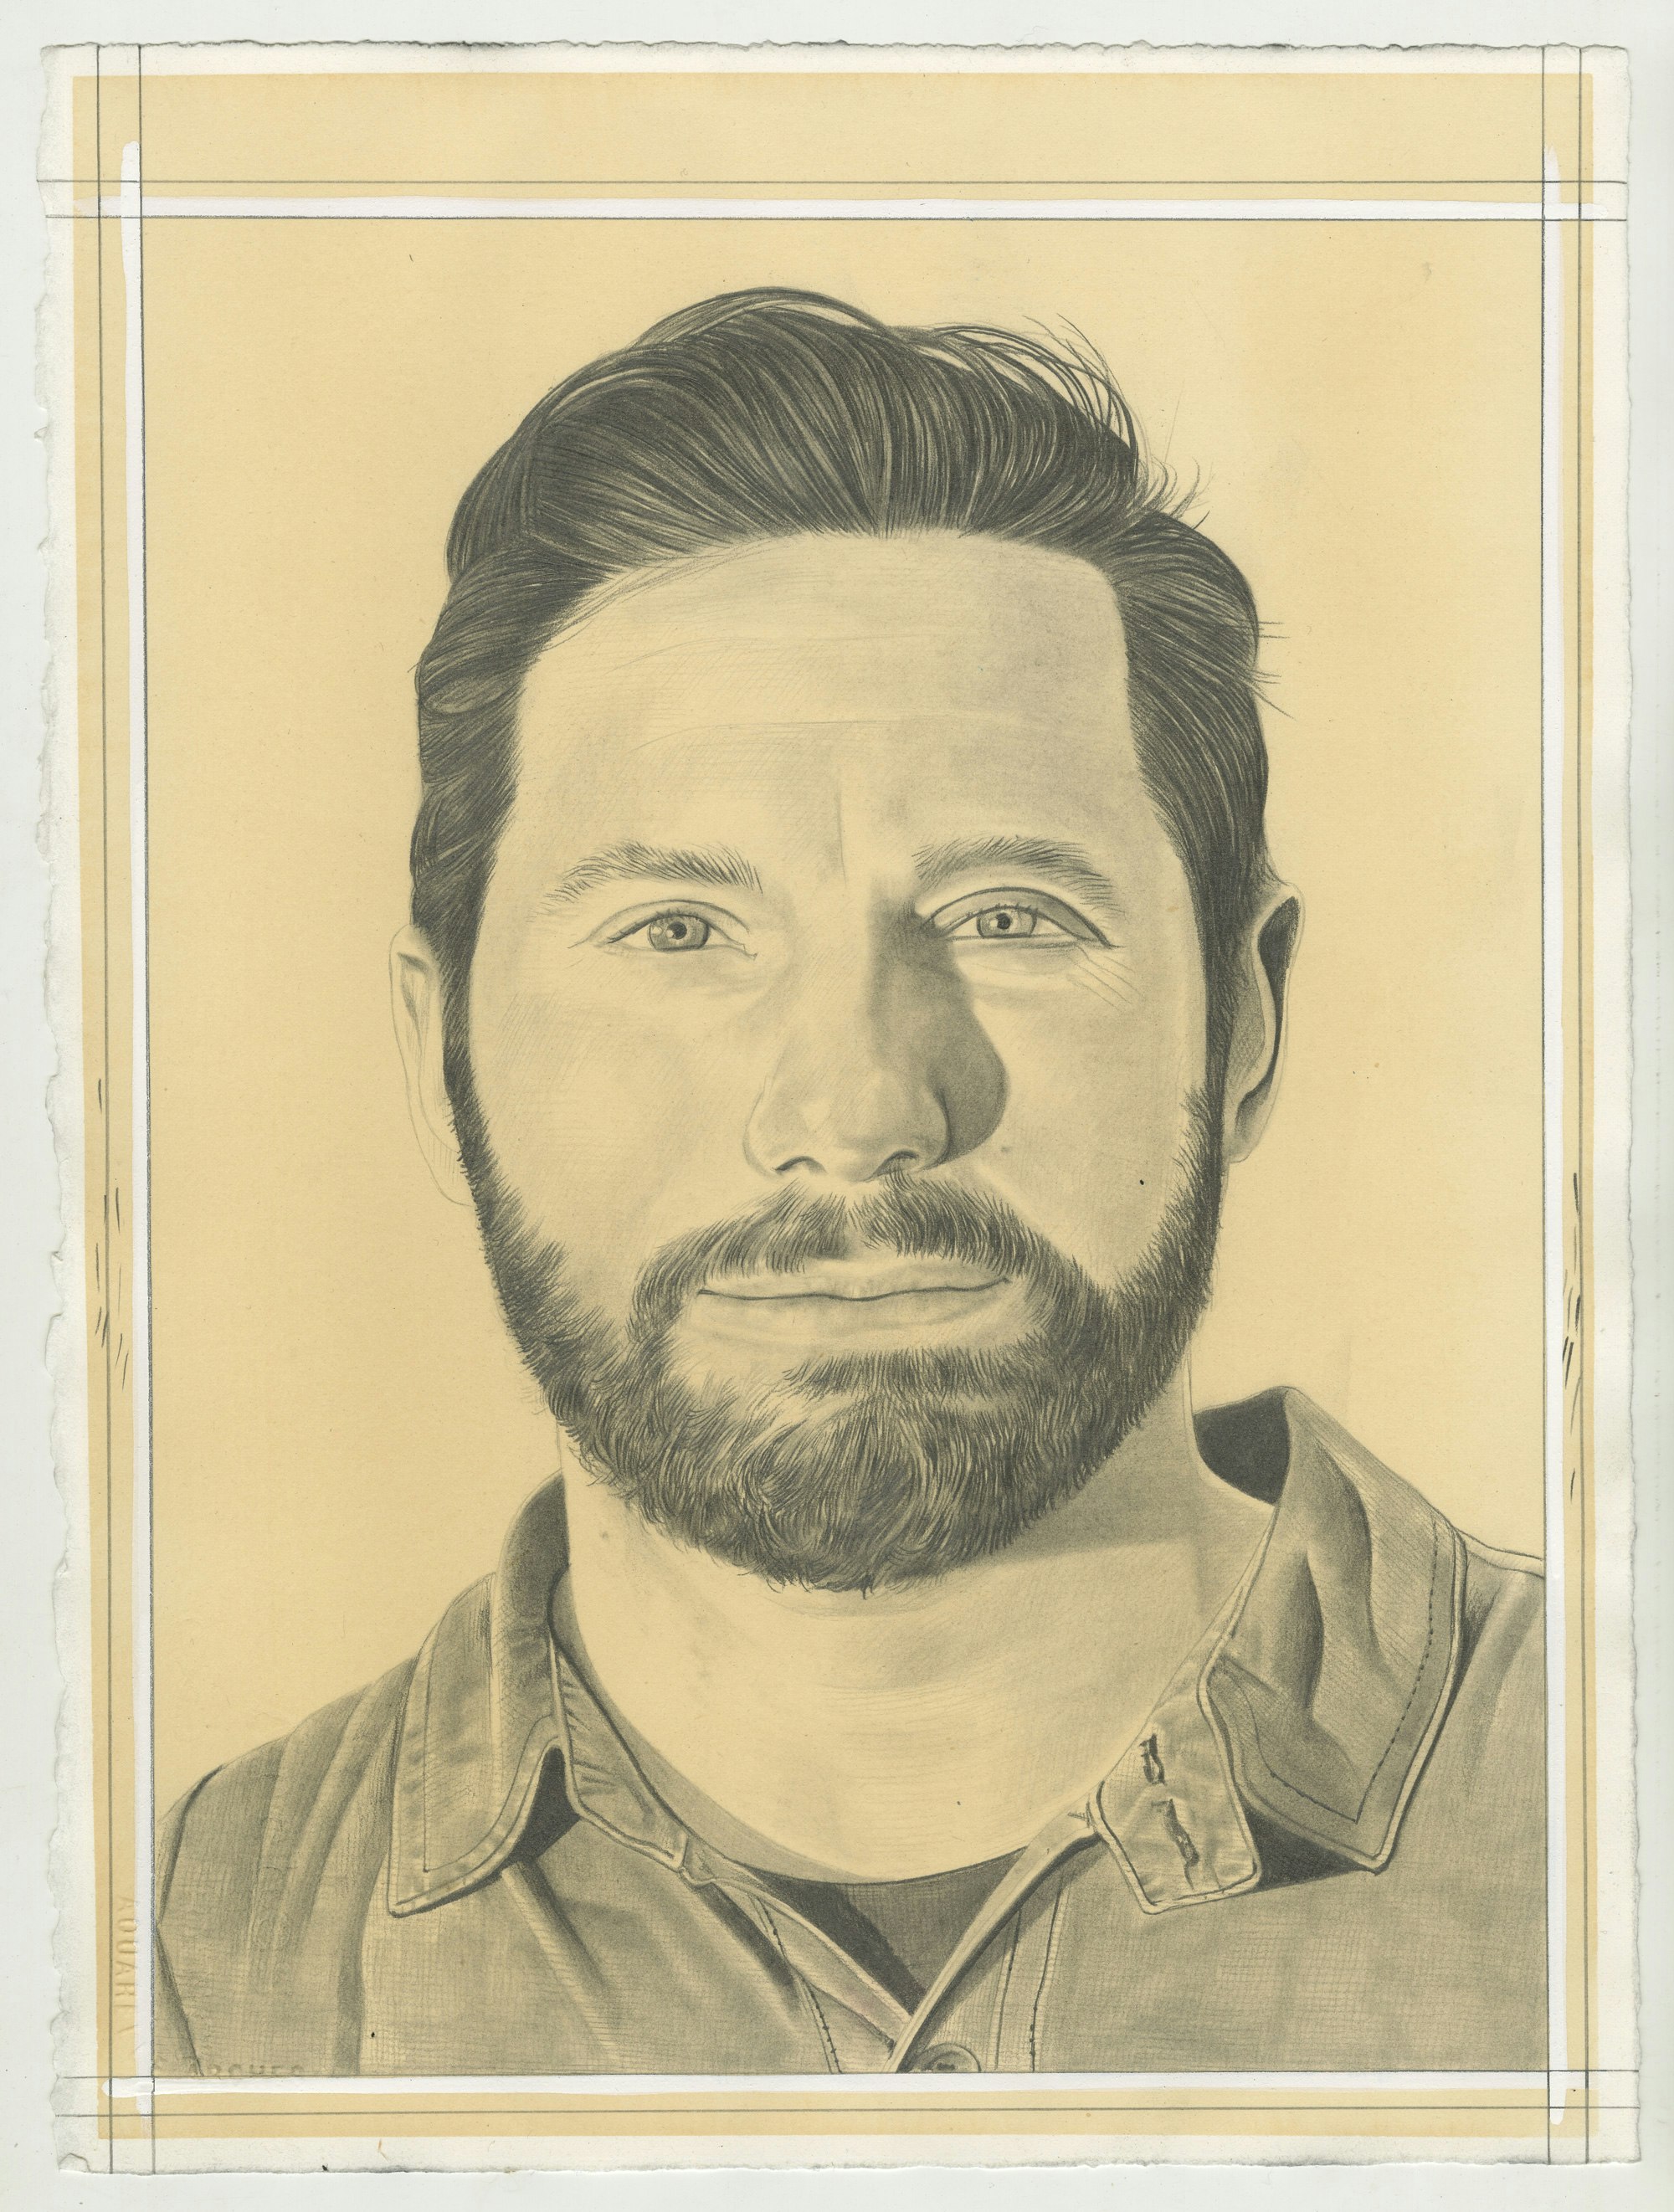 Portrait of Brett Wallace. Pencil on Paper by Phong Bui. 